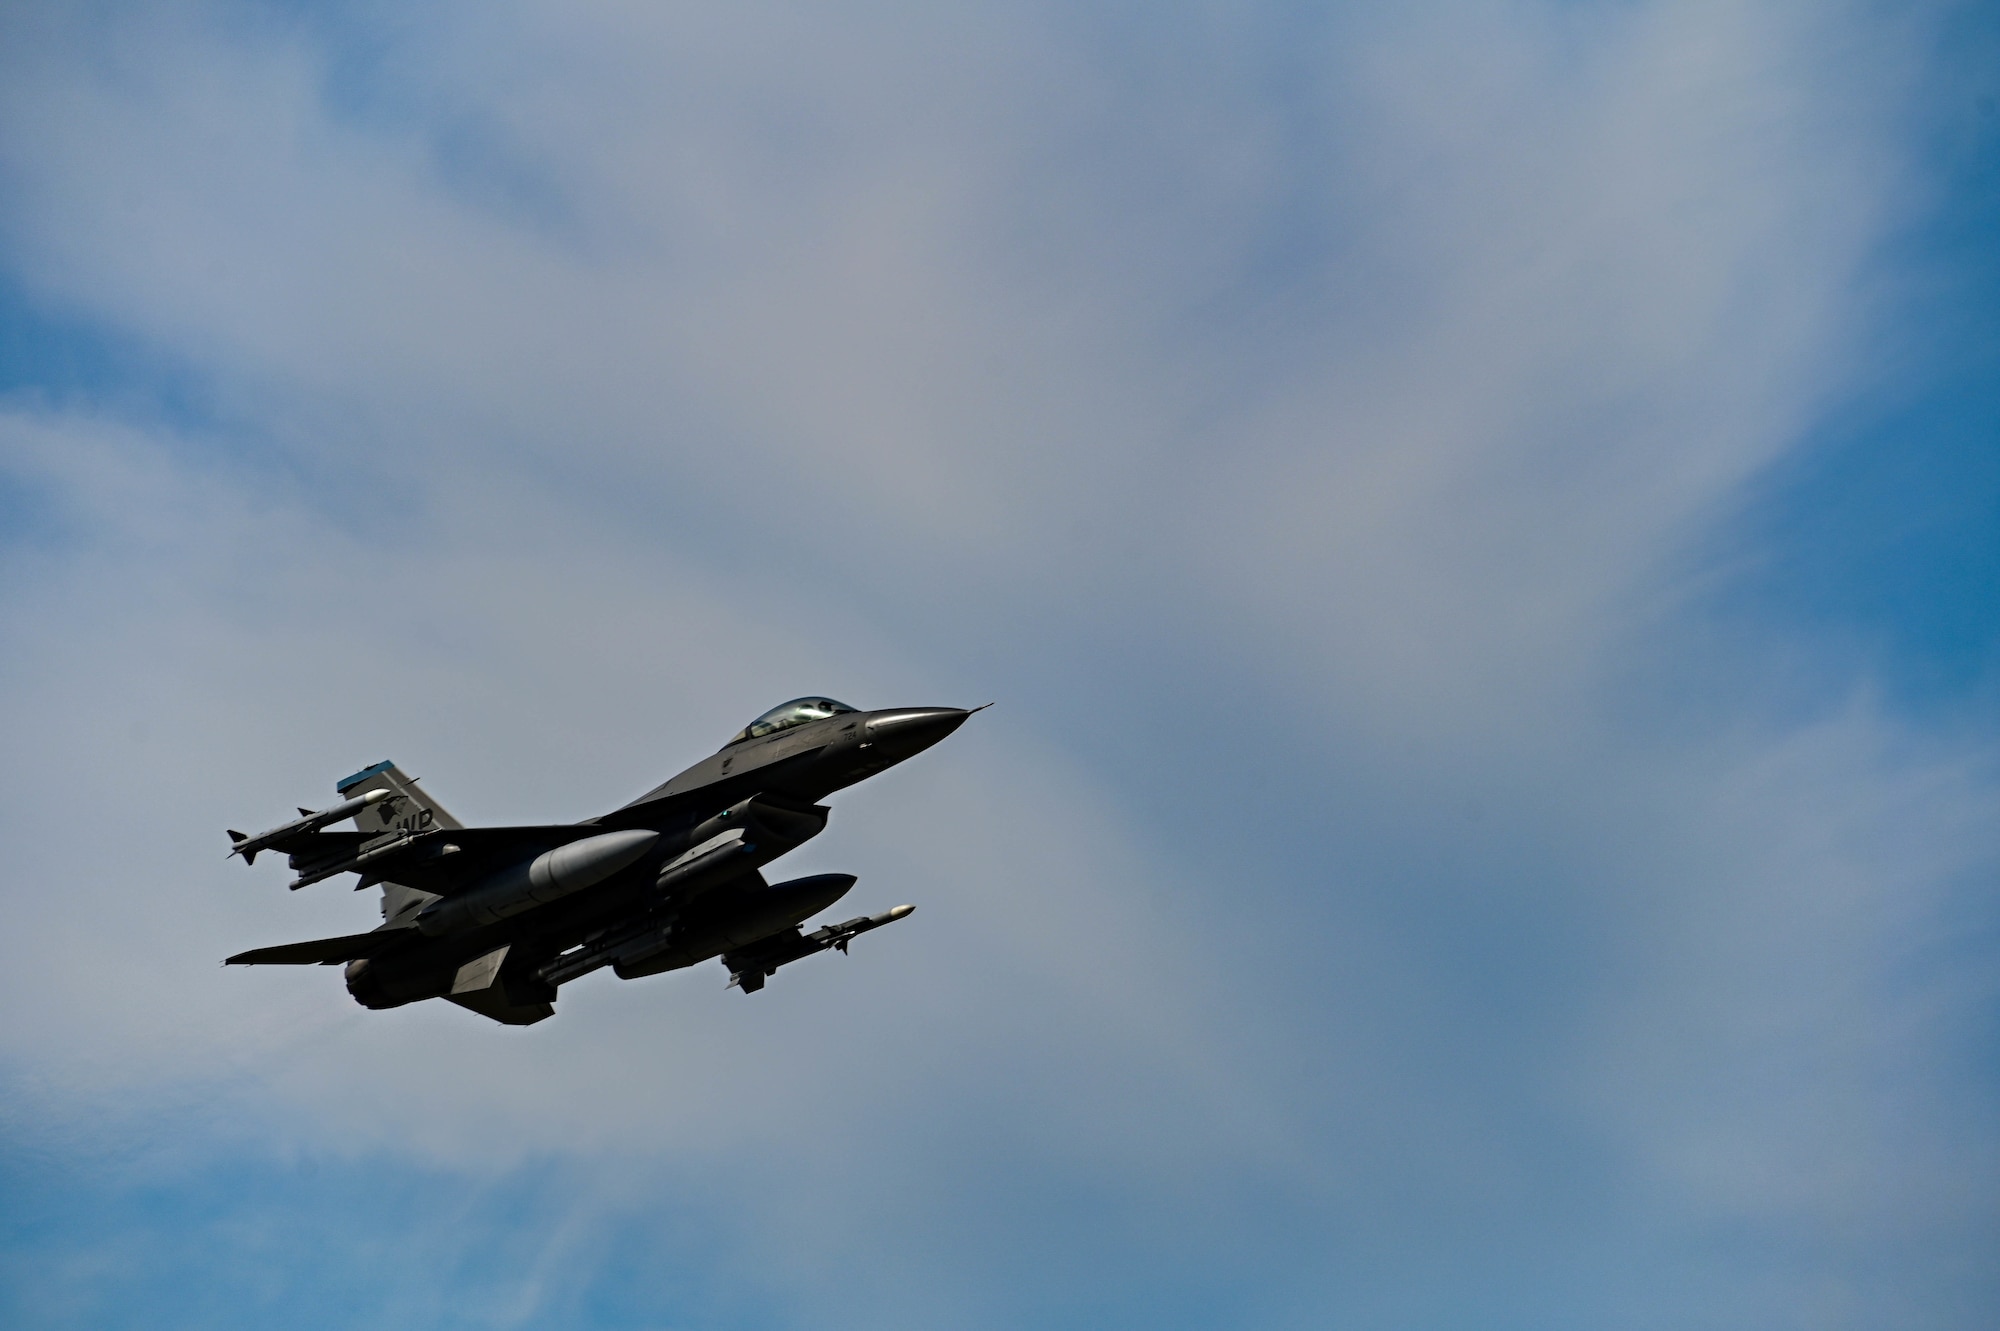 A U.S. Air Force F-16 Fighting Falcon assigned to the 8th Fighter Wing soars through the sky during routine training at Kunsan Air Base, Republic of Korea, Sept. 22, 2022. U.S. and ROKAF service members carried out ​​bilateral training to improve mission focus and force interoperability. (U.S. Air Force Photo by Senior Airman Shannon Braaten)